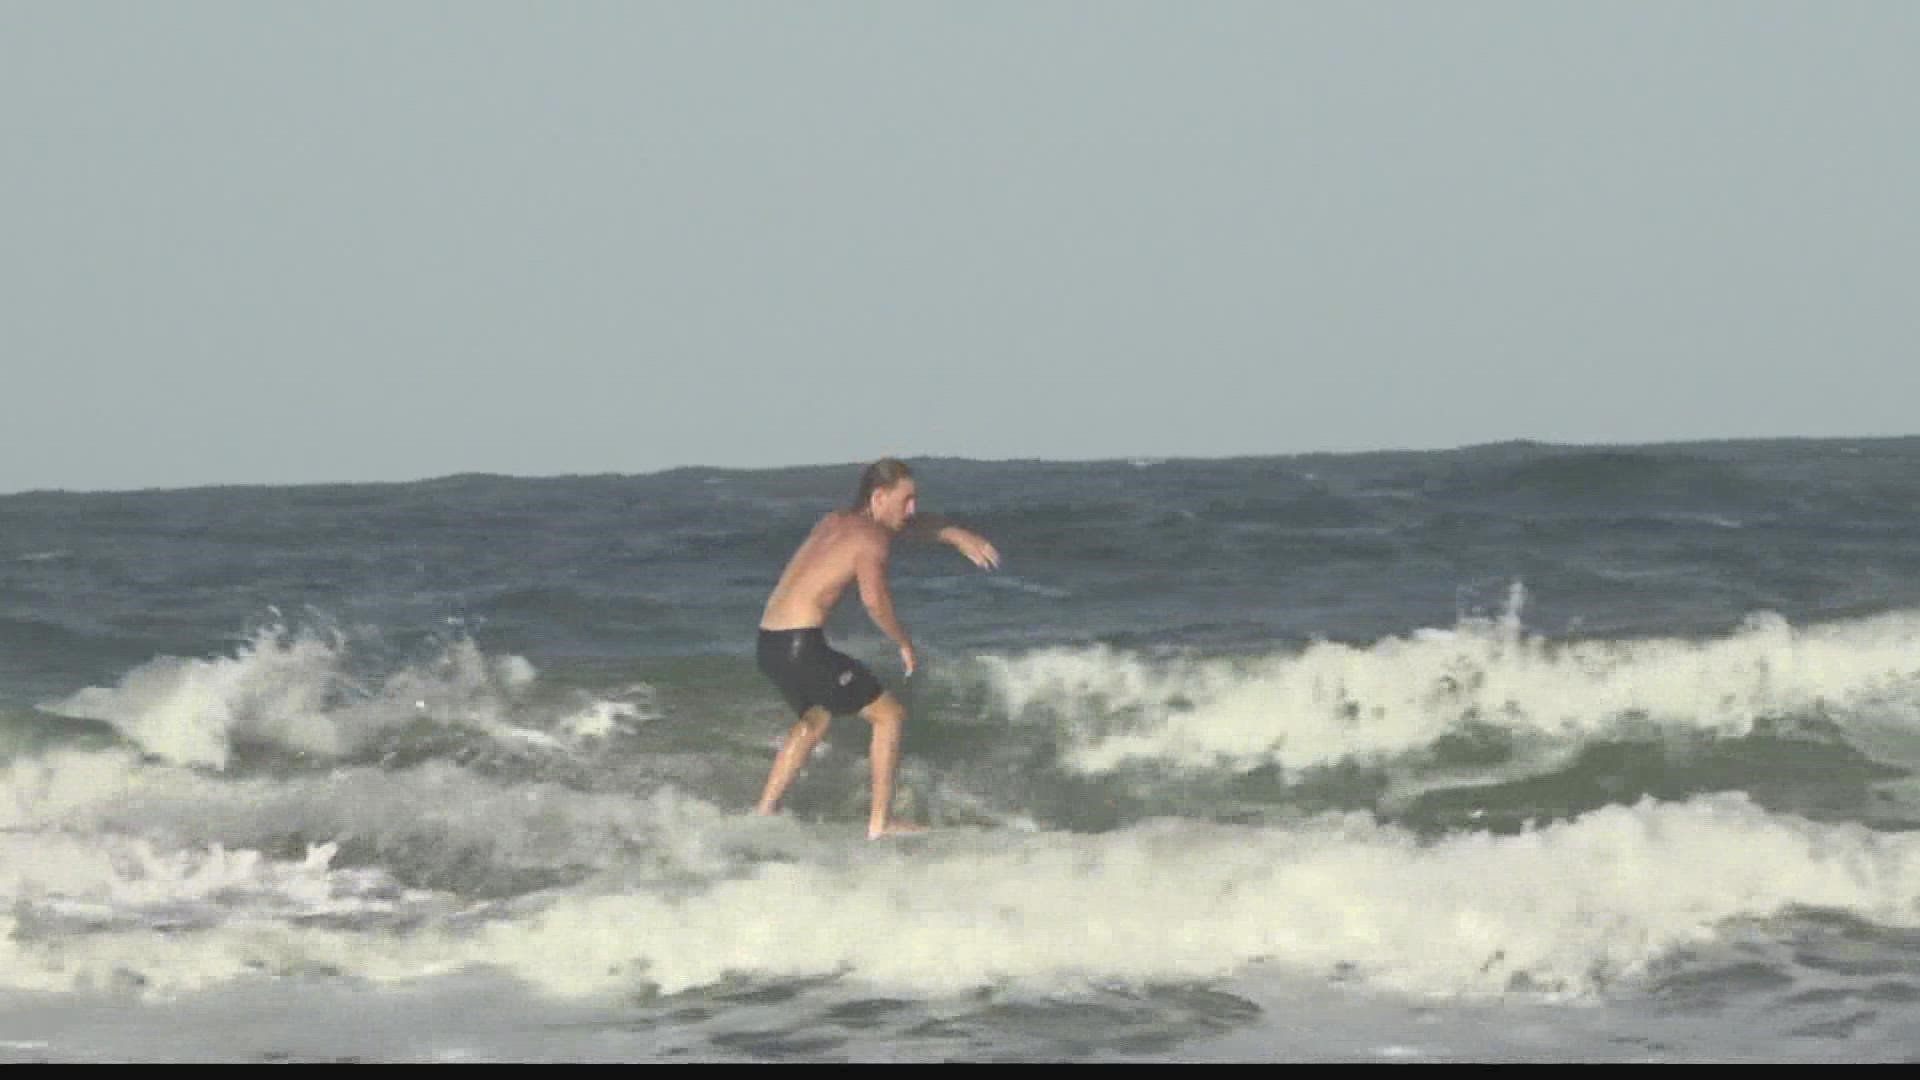 After 8 straight East Coast titles the UNF Surf Team hopes to capture the national championship.